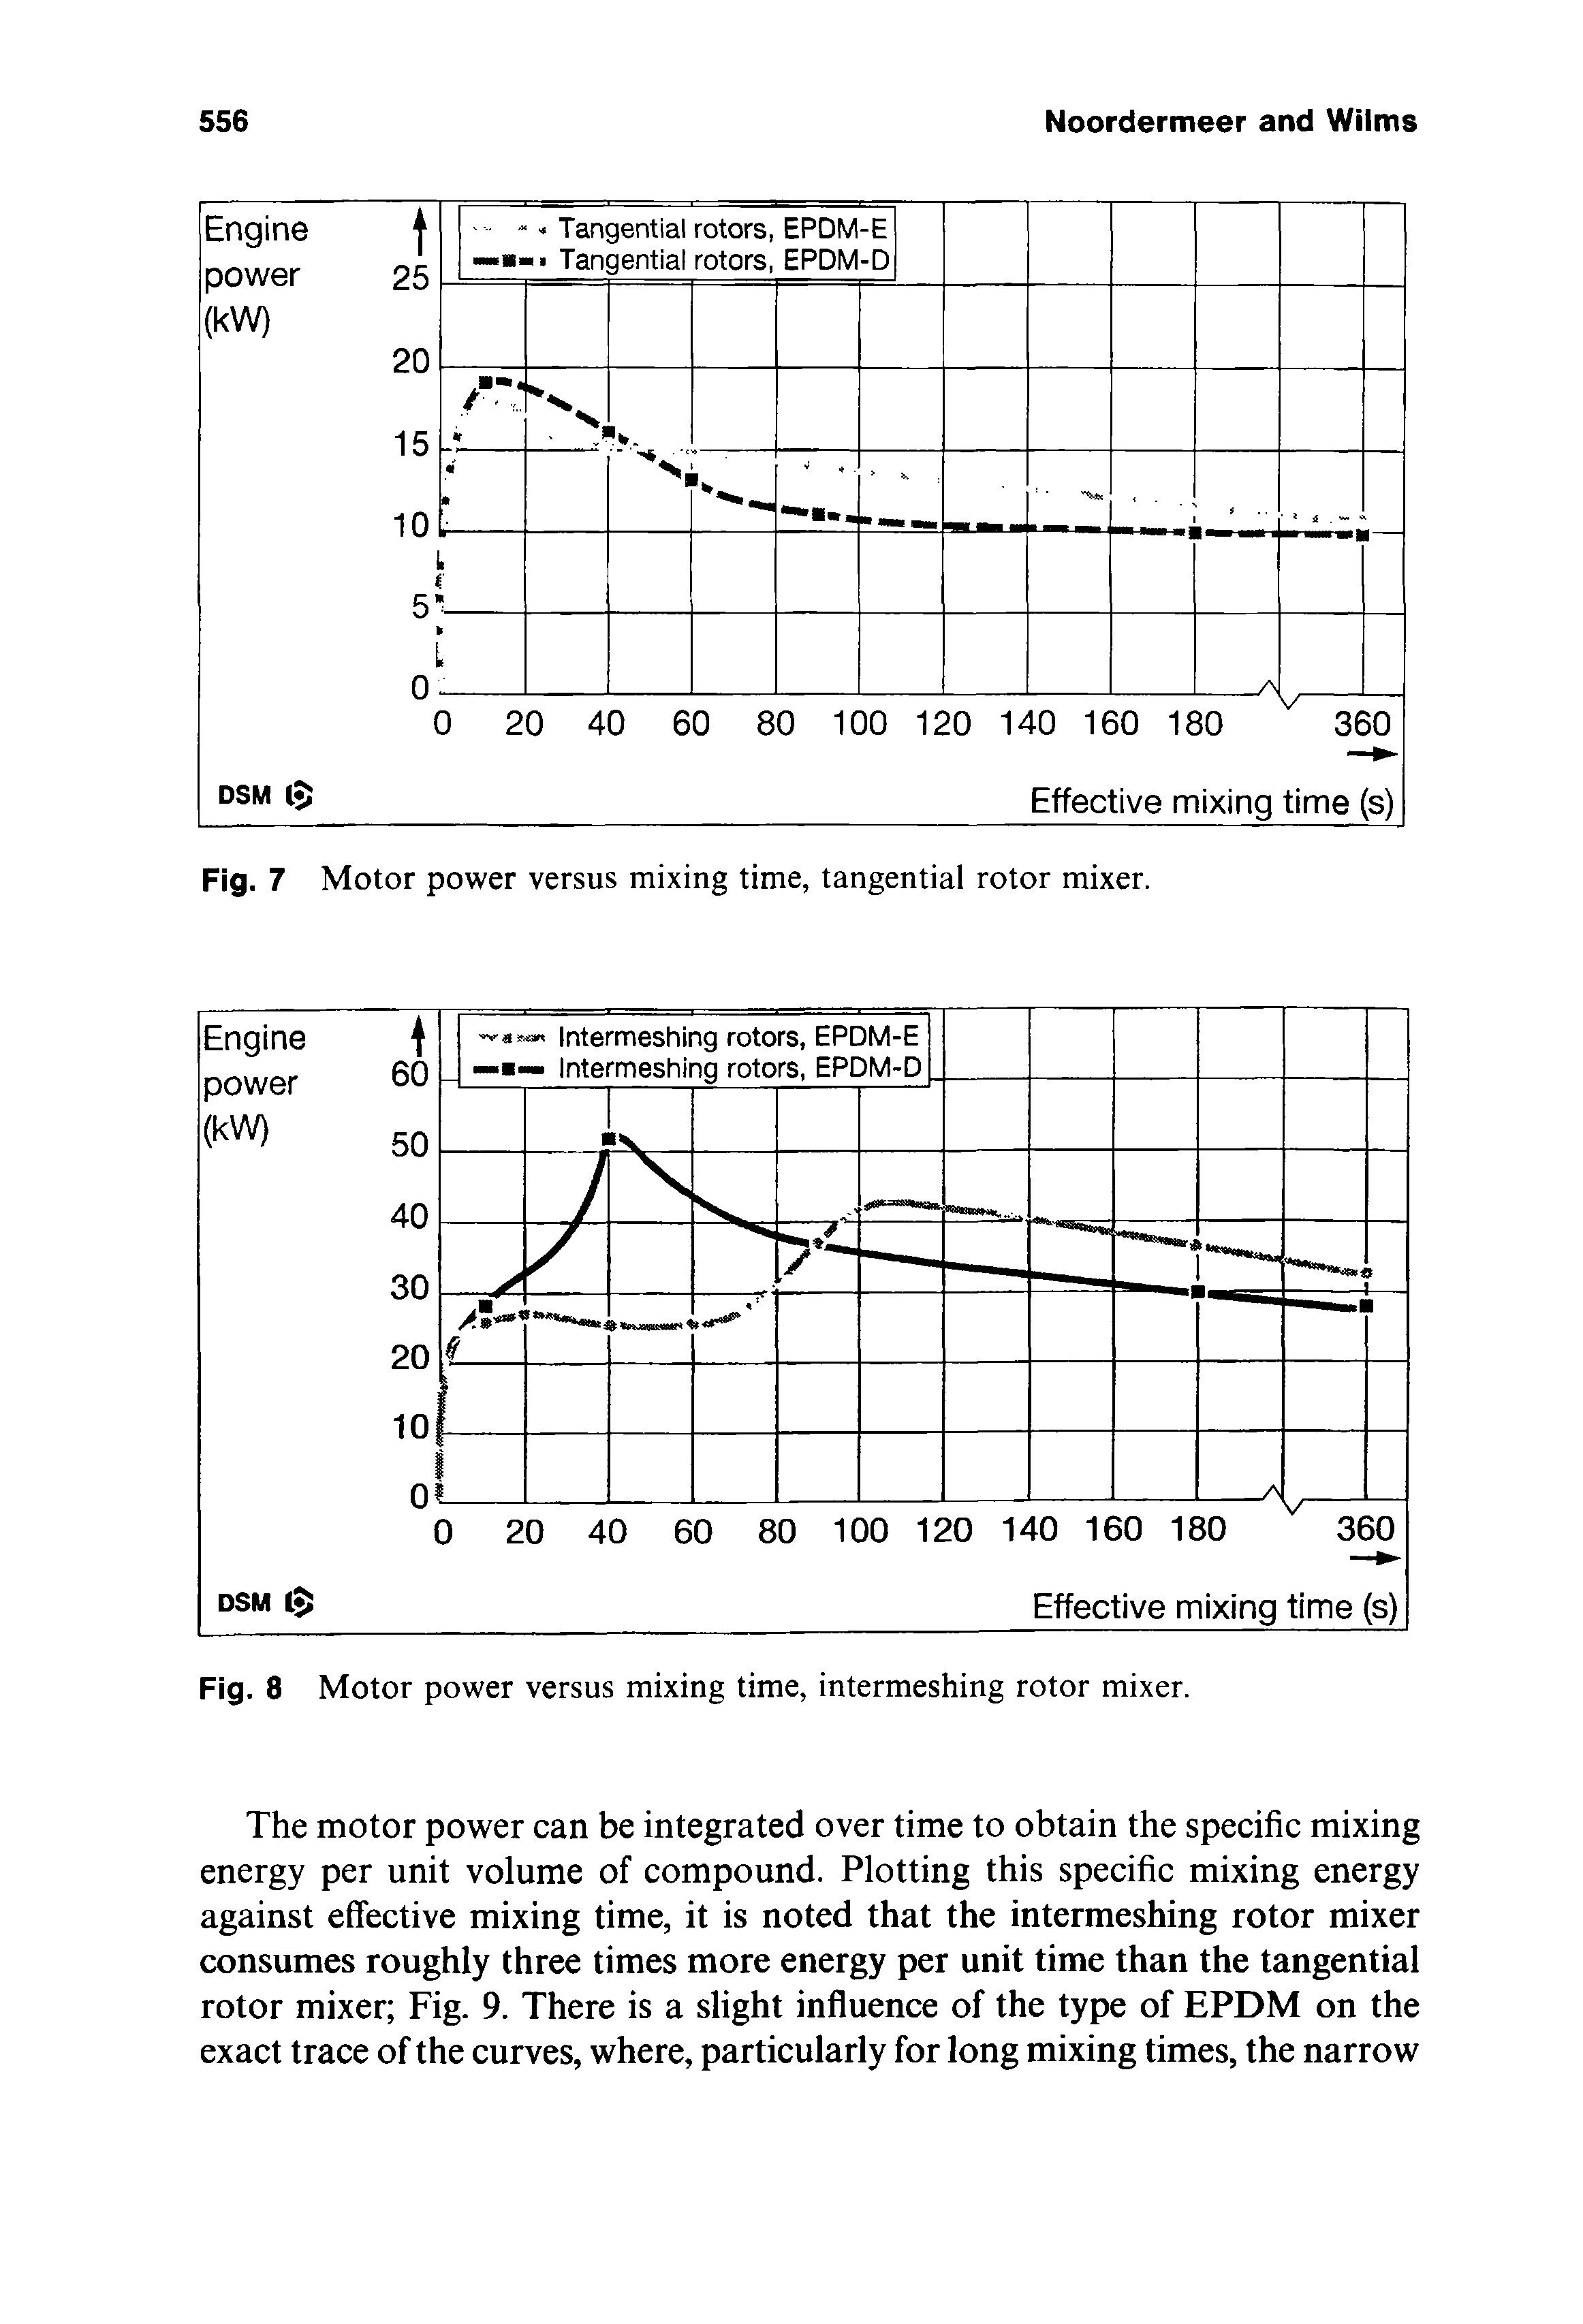 Fig. 7 Motor power versus mixing time, tangential rotor mixer.